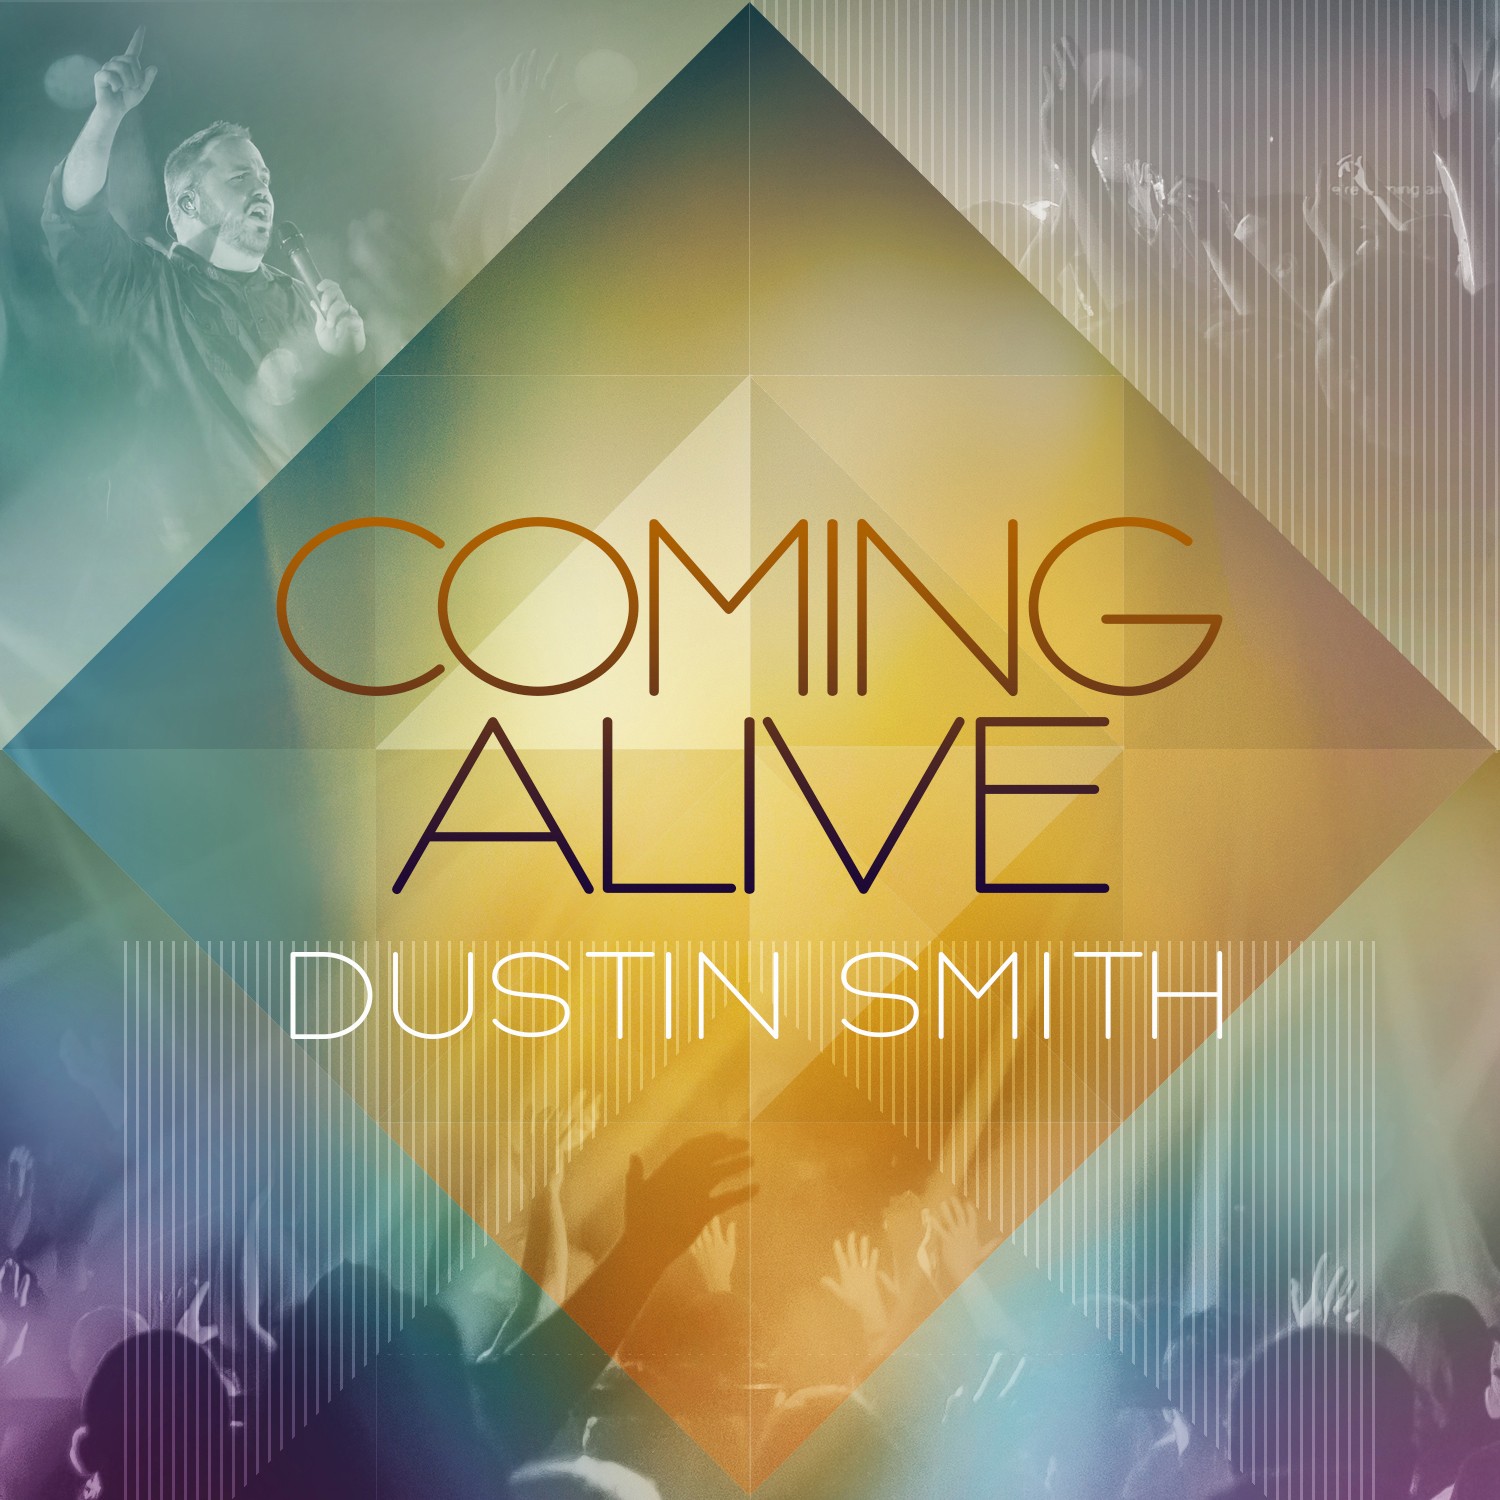 New Live Album 'Coming Alive' For Dustin Smith